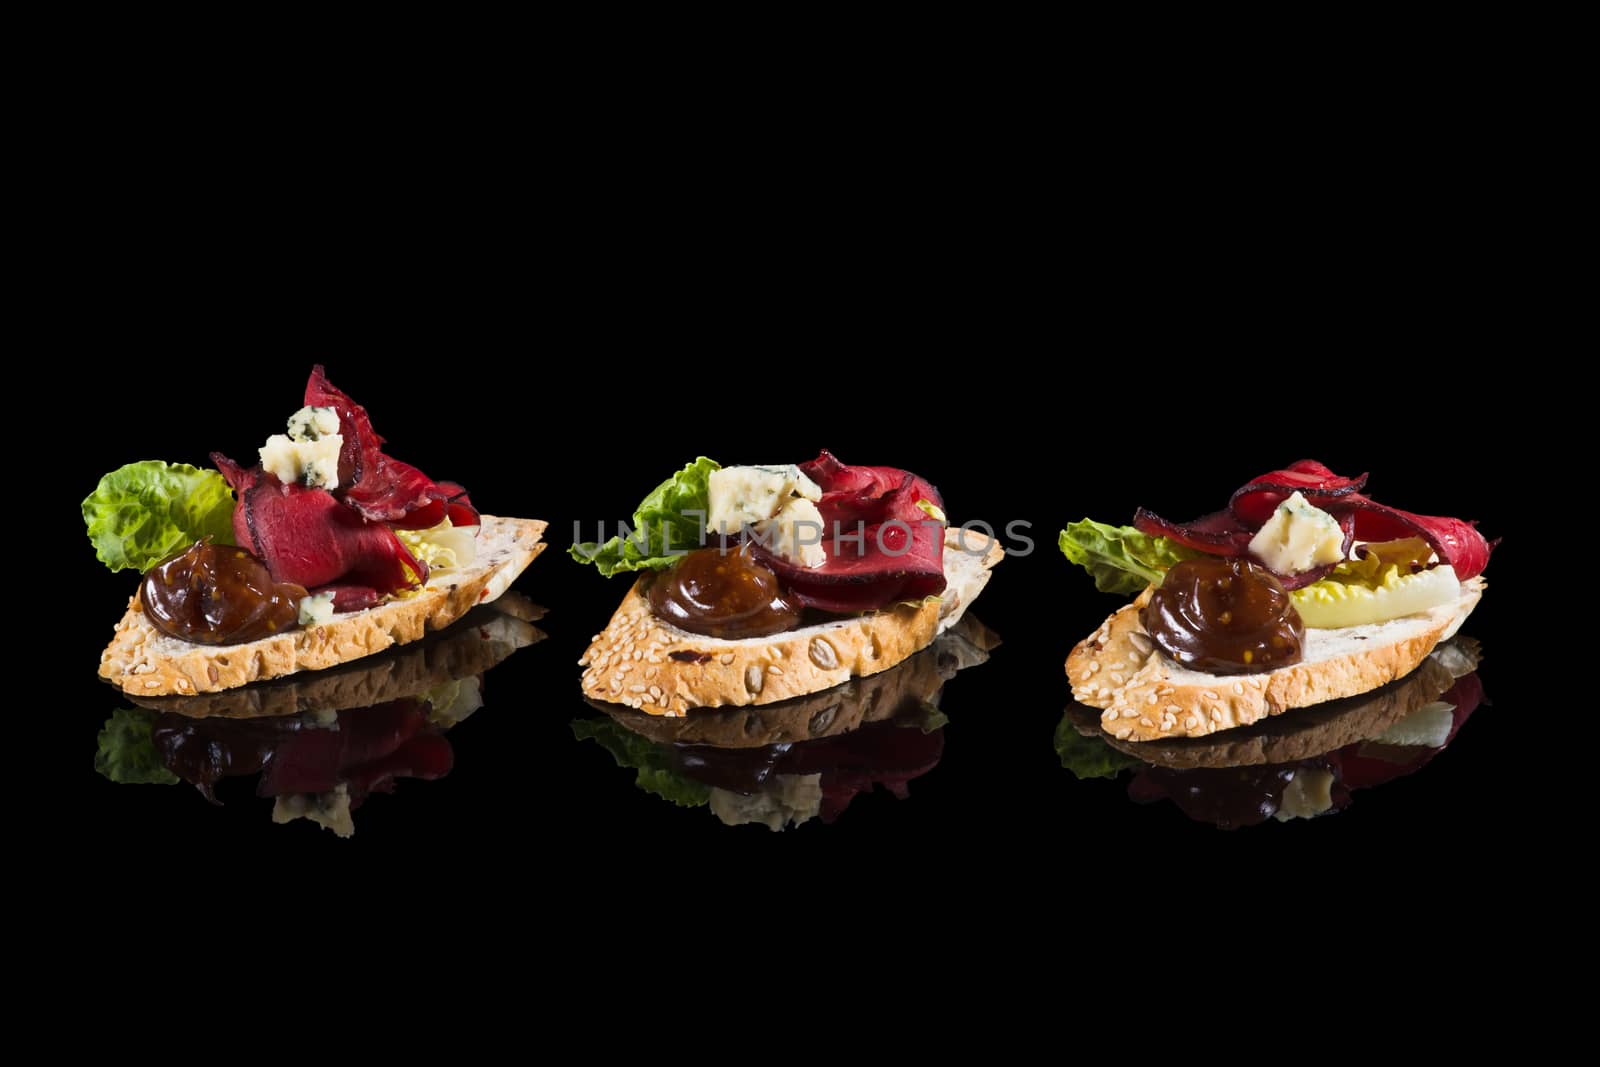 Bruschettas with beef and cheese on black background